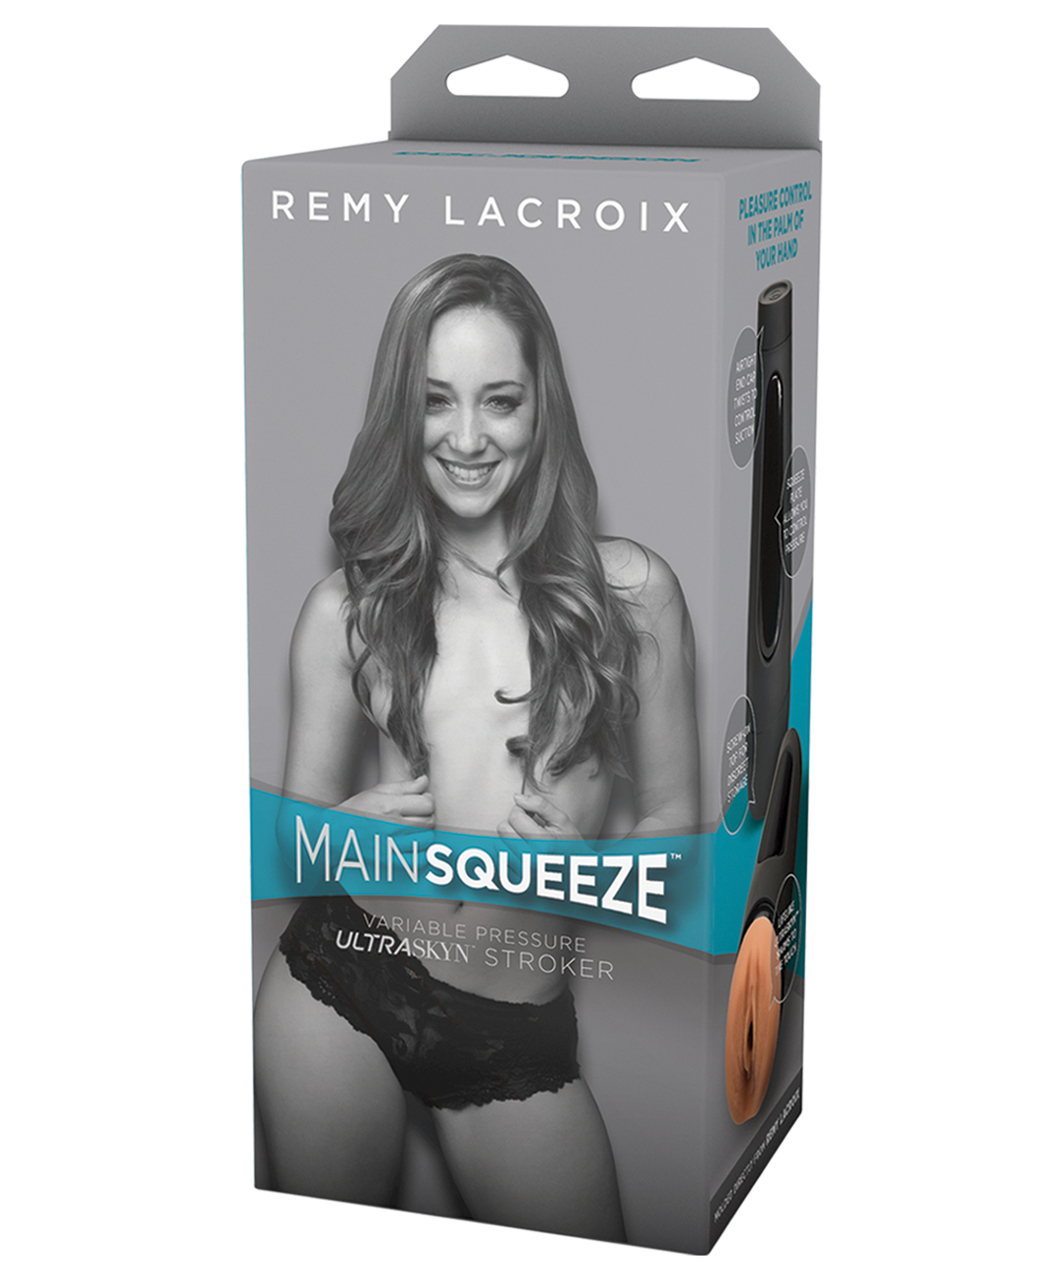 Doc Johnson Main Squeeze Remy LaCroix мастурбатор